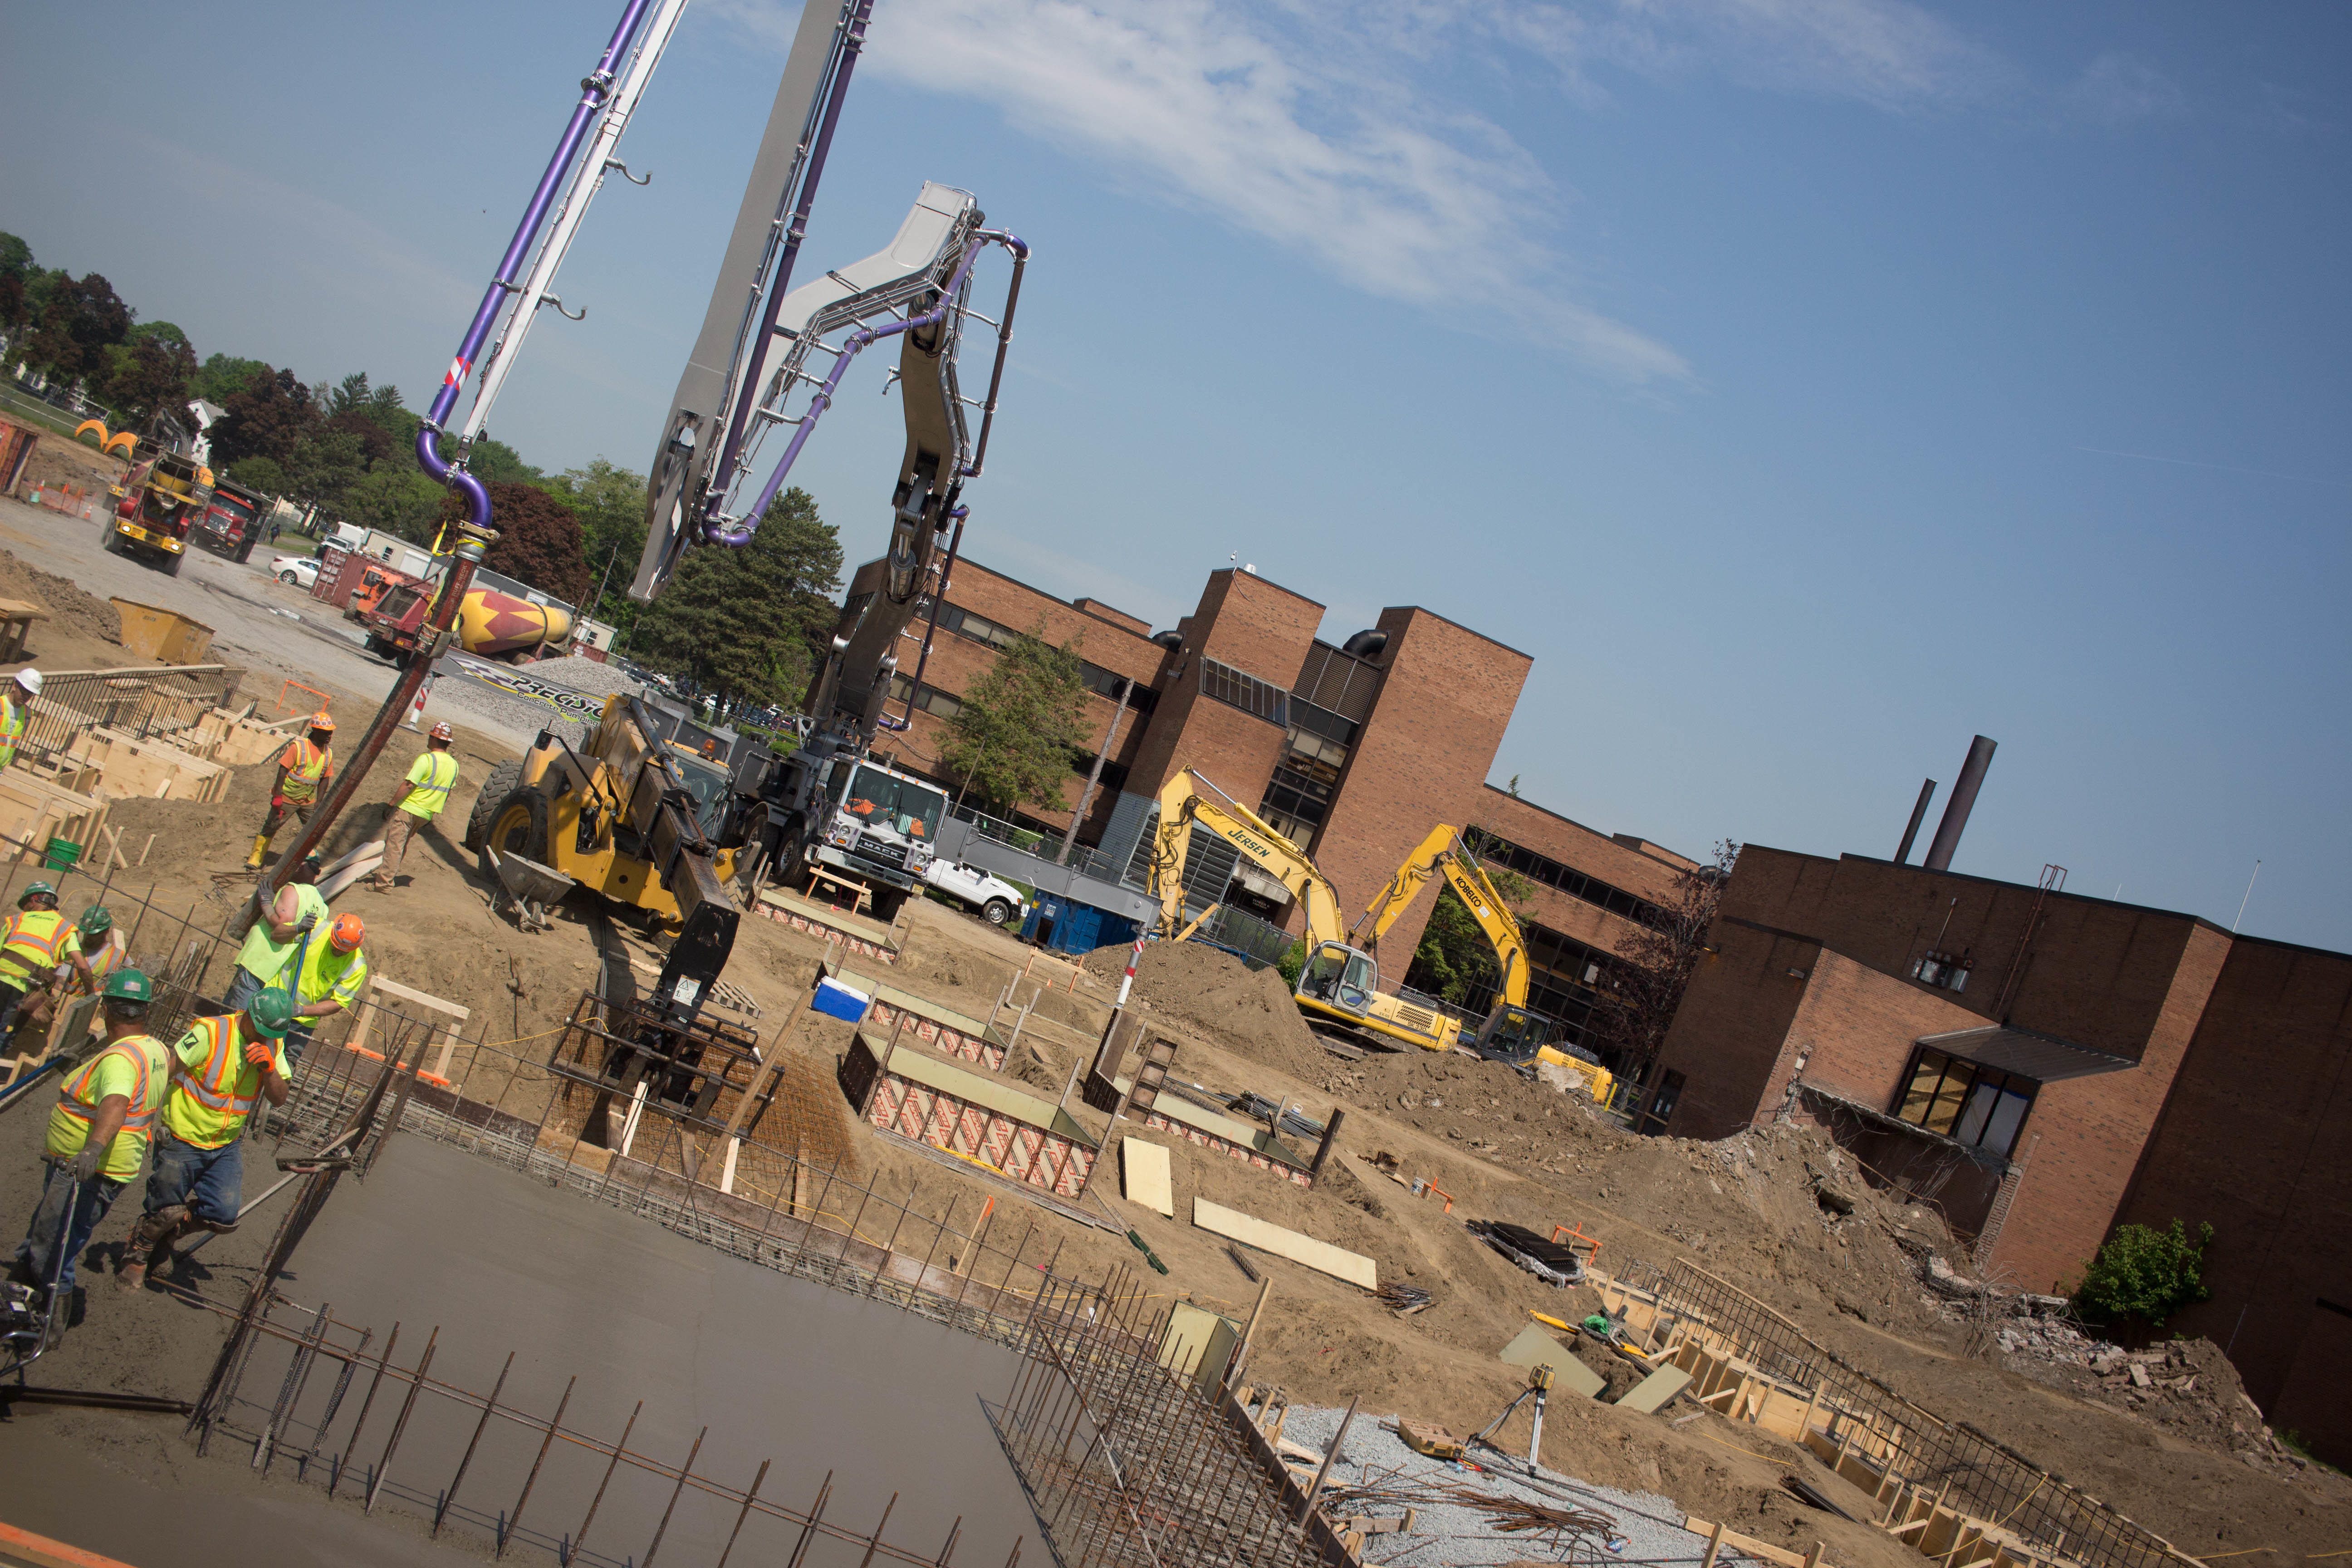 View of the construction site with the foundation of the new academic building in the foreground, and the existing Albany High in the rear.